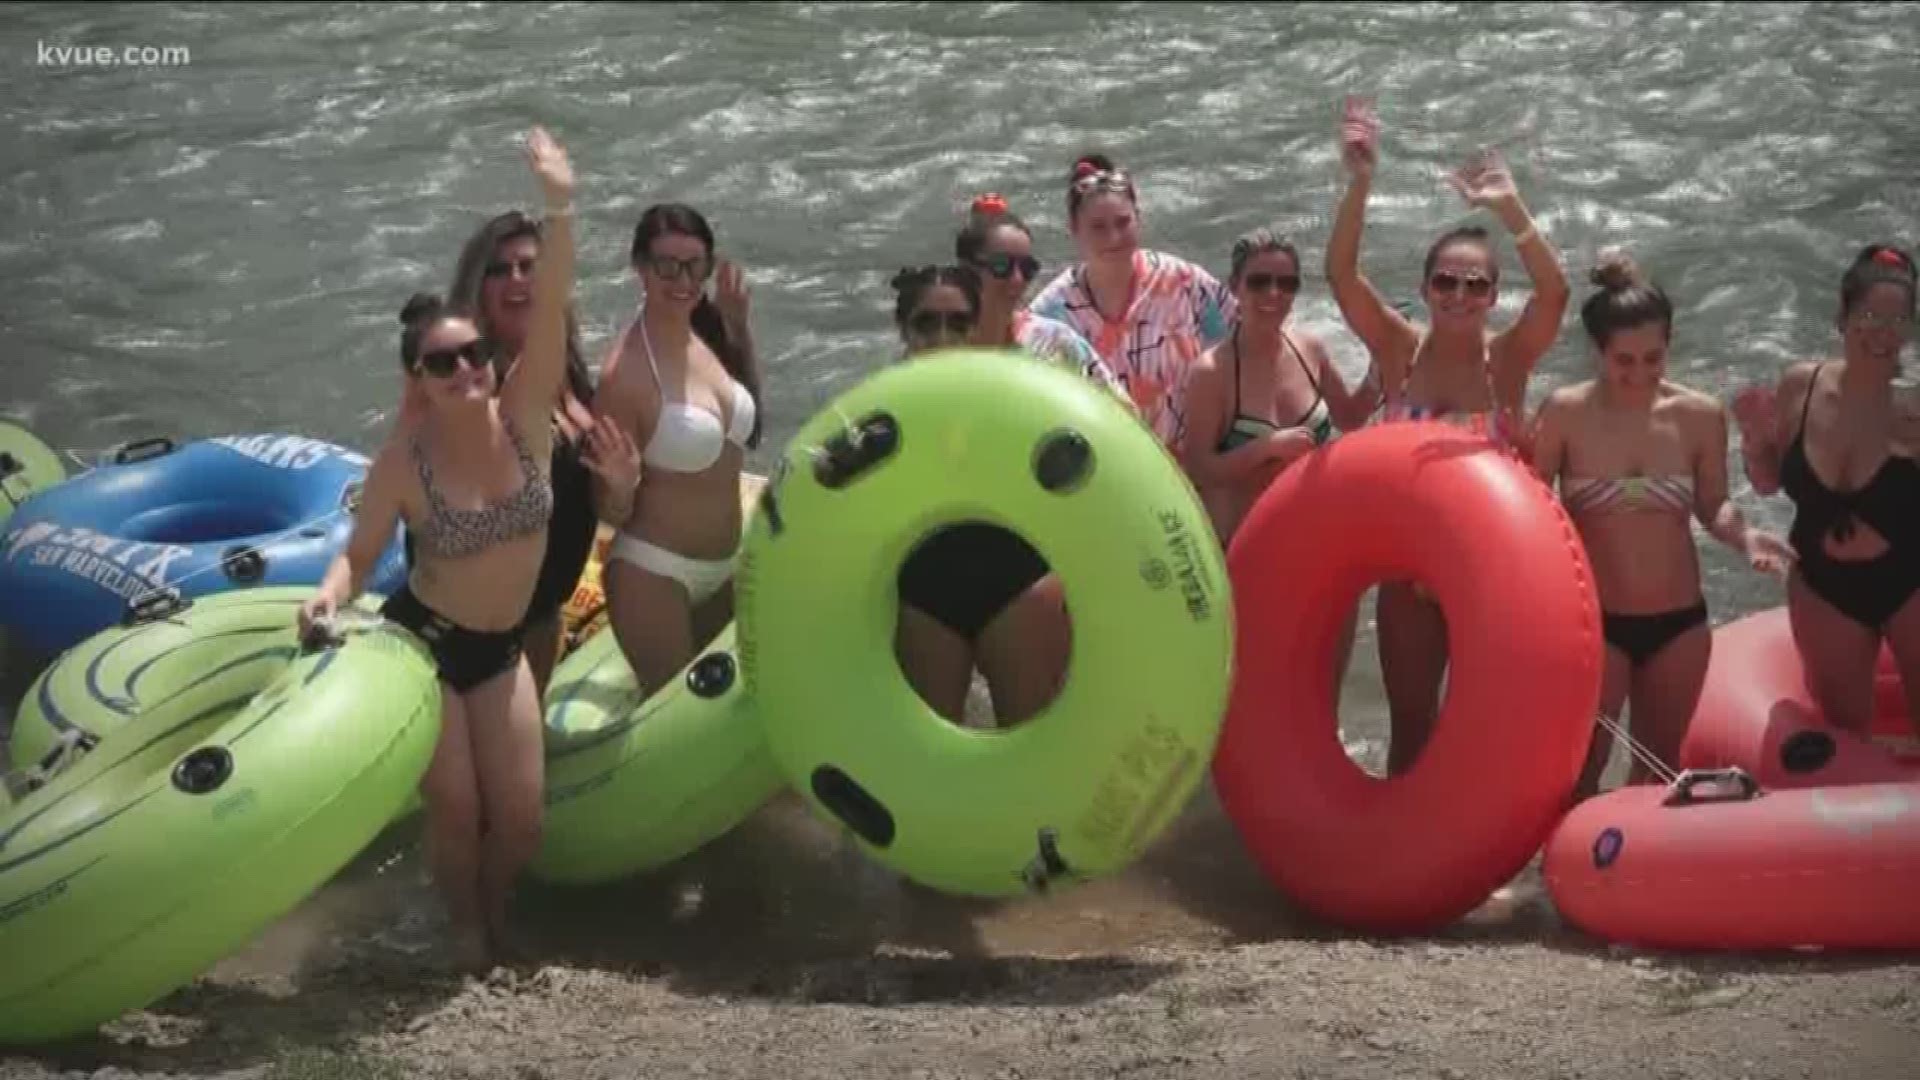 Central Texas tubing experts share their tips for staying safe this tubing season.